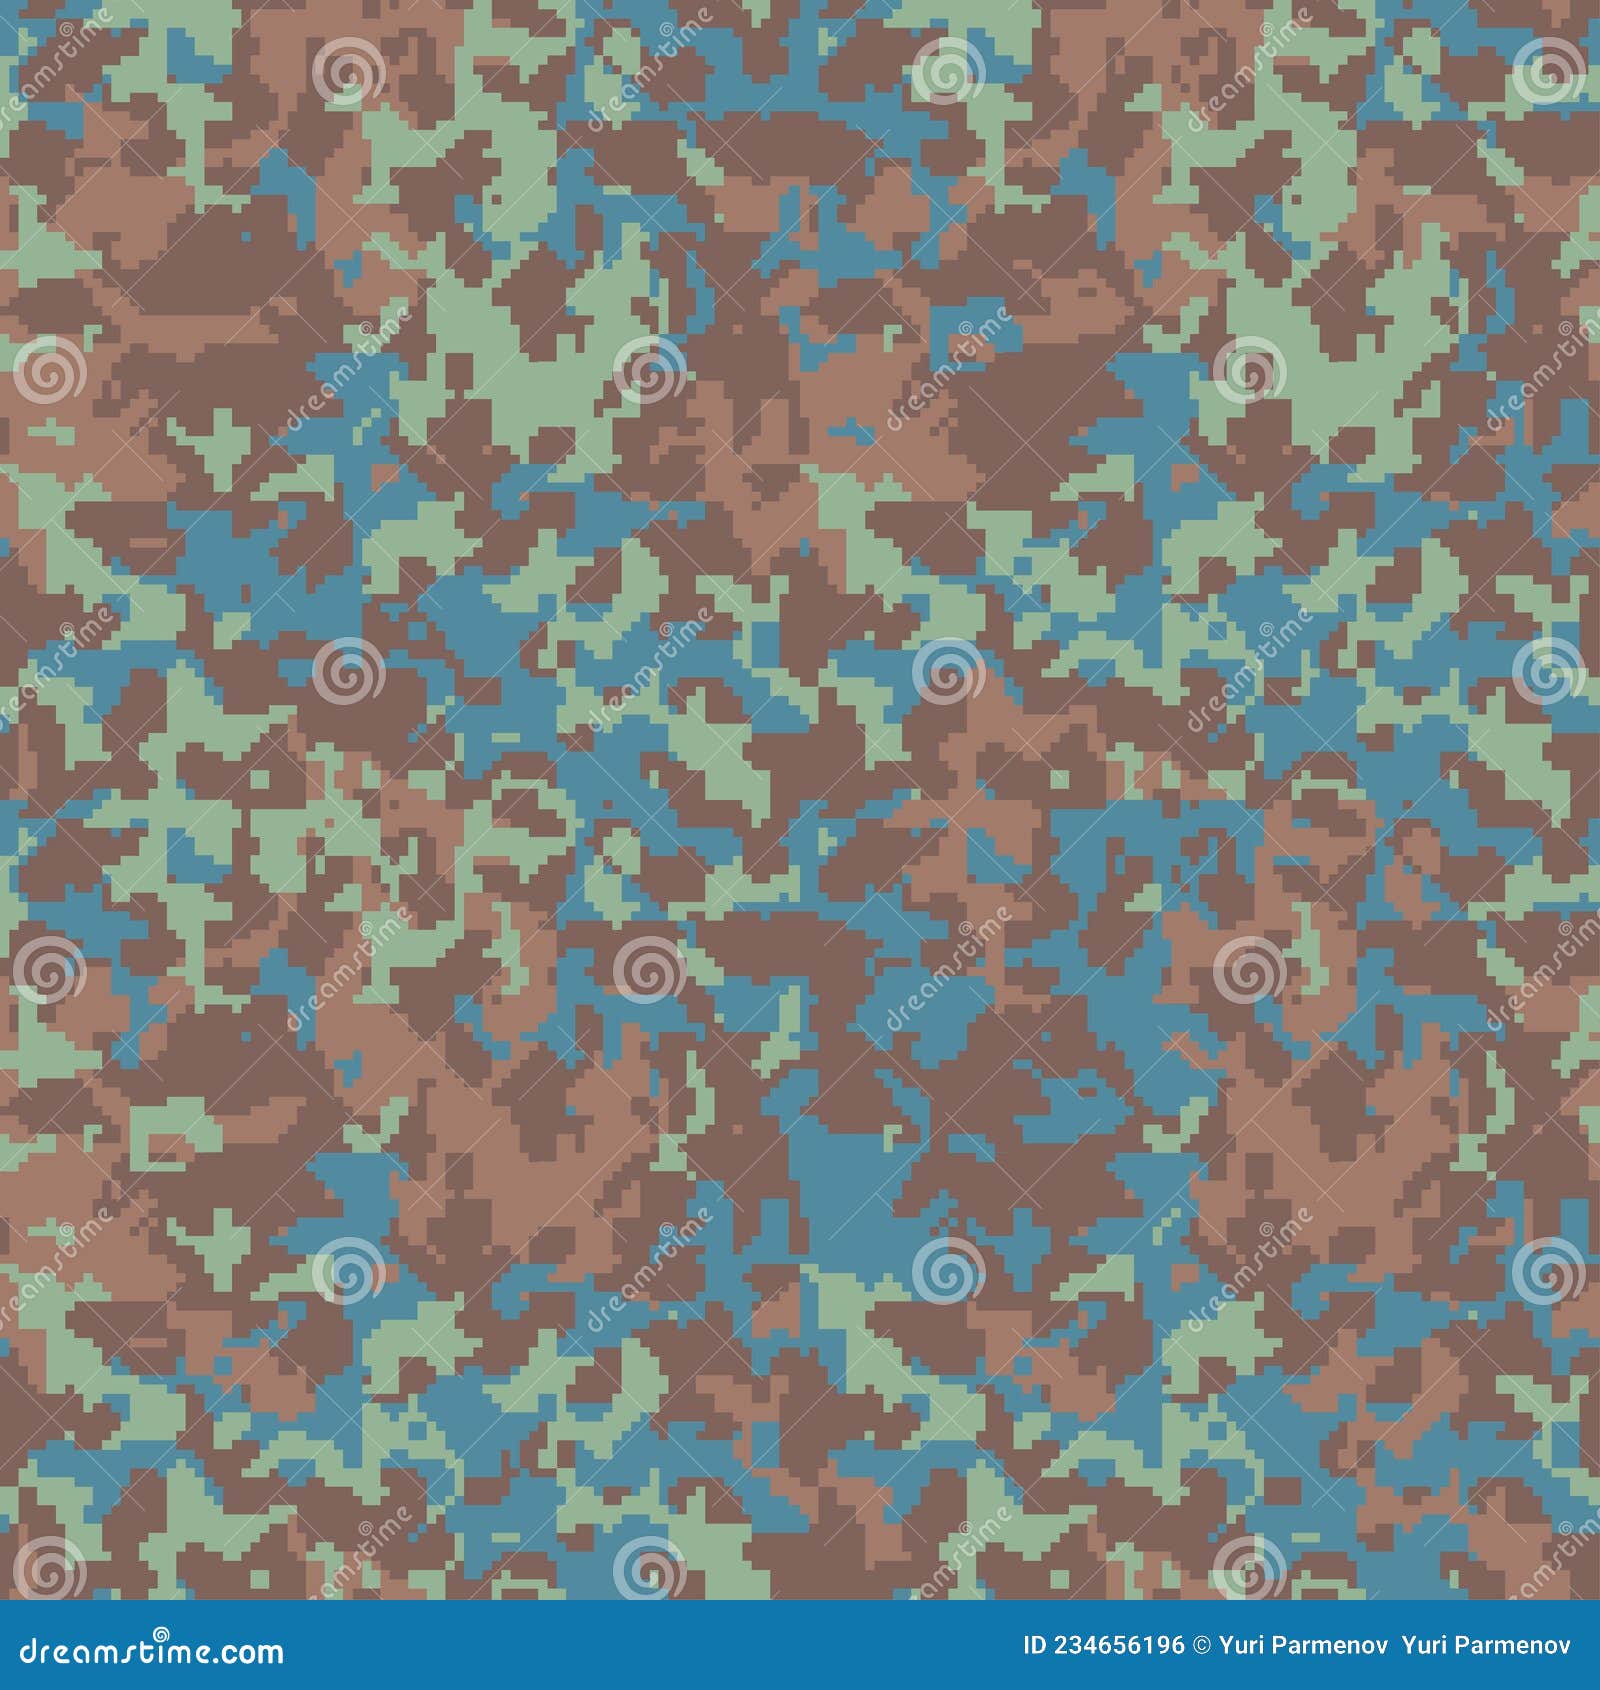 Military Digital Camouflage, Seamless Texture. Camo Urban Pattern for ...